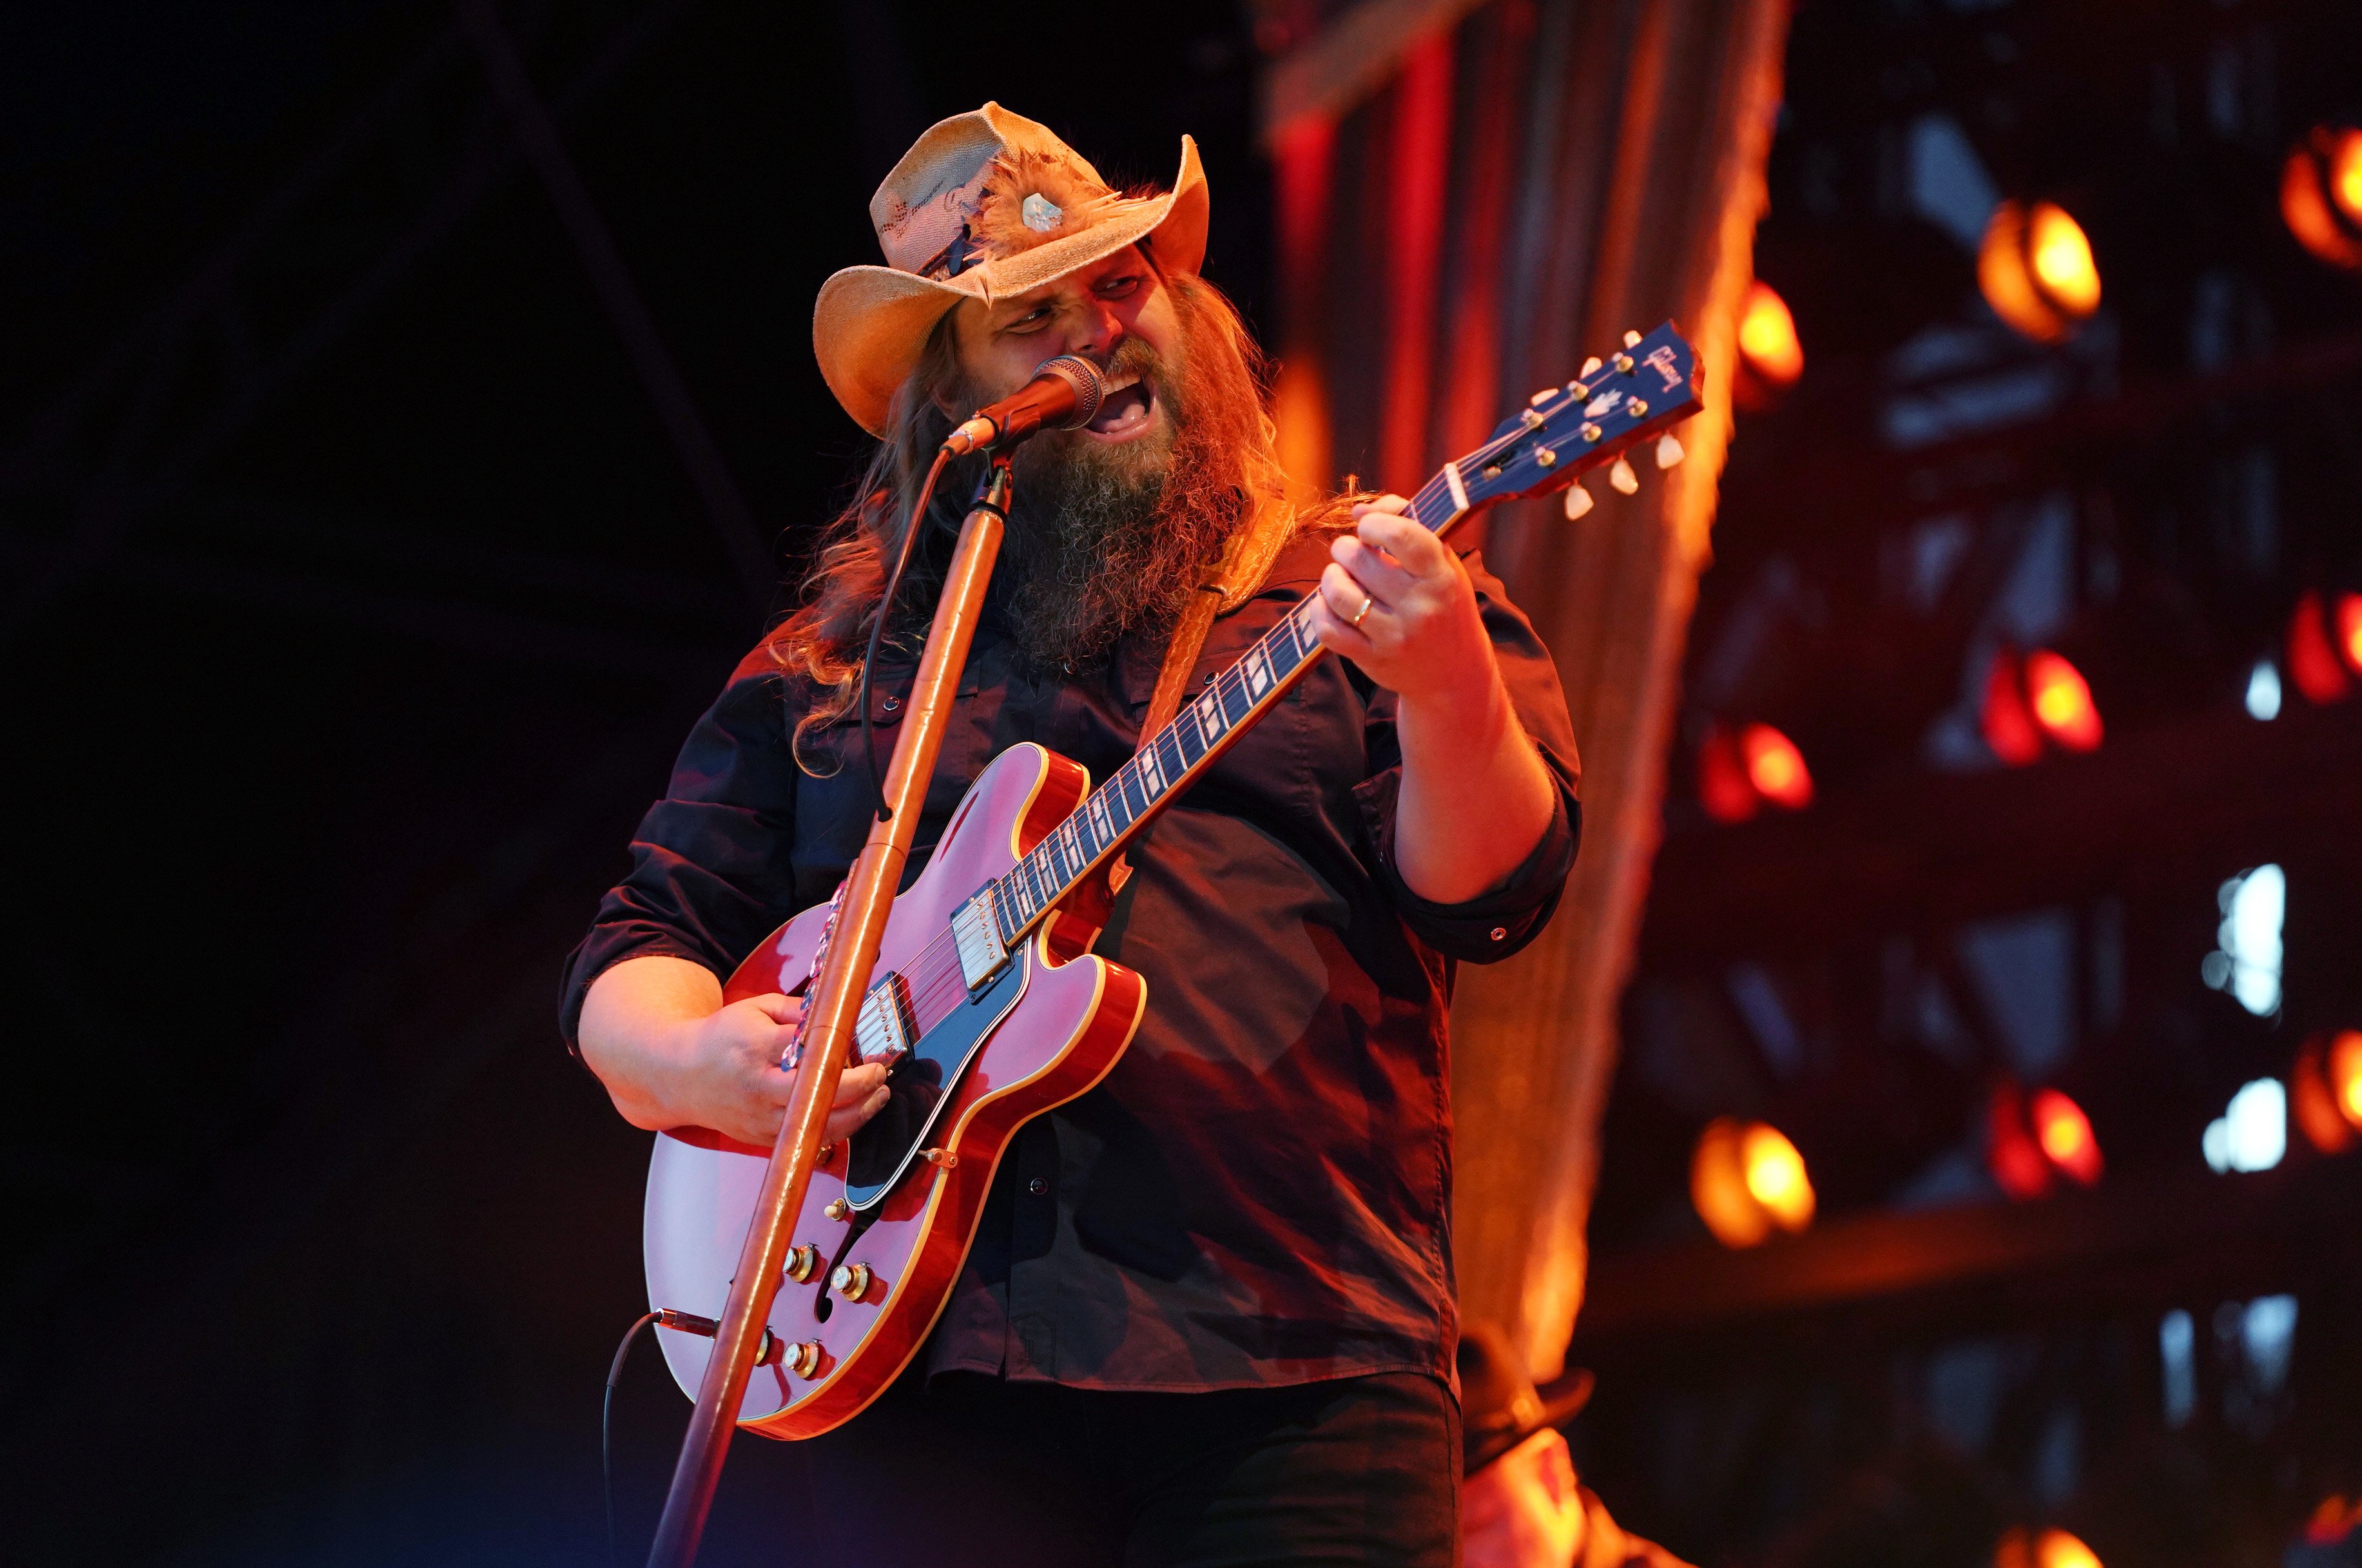 Chris Stapleton is pictured as he performs onstage during day two of the 2022 Pilgrimage Music & Cultural Festival on September 25, 2022, in Franklin, Tennessee | Source: Getty Images